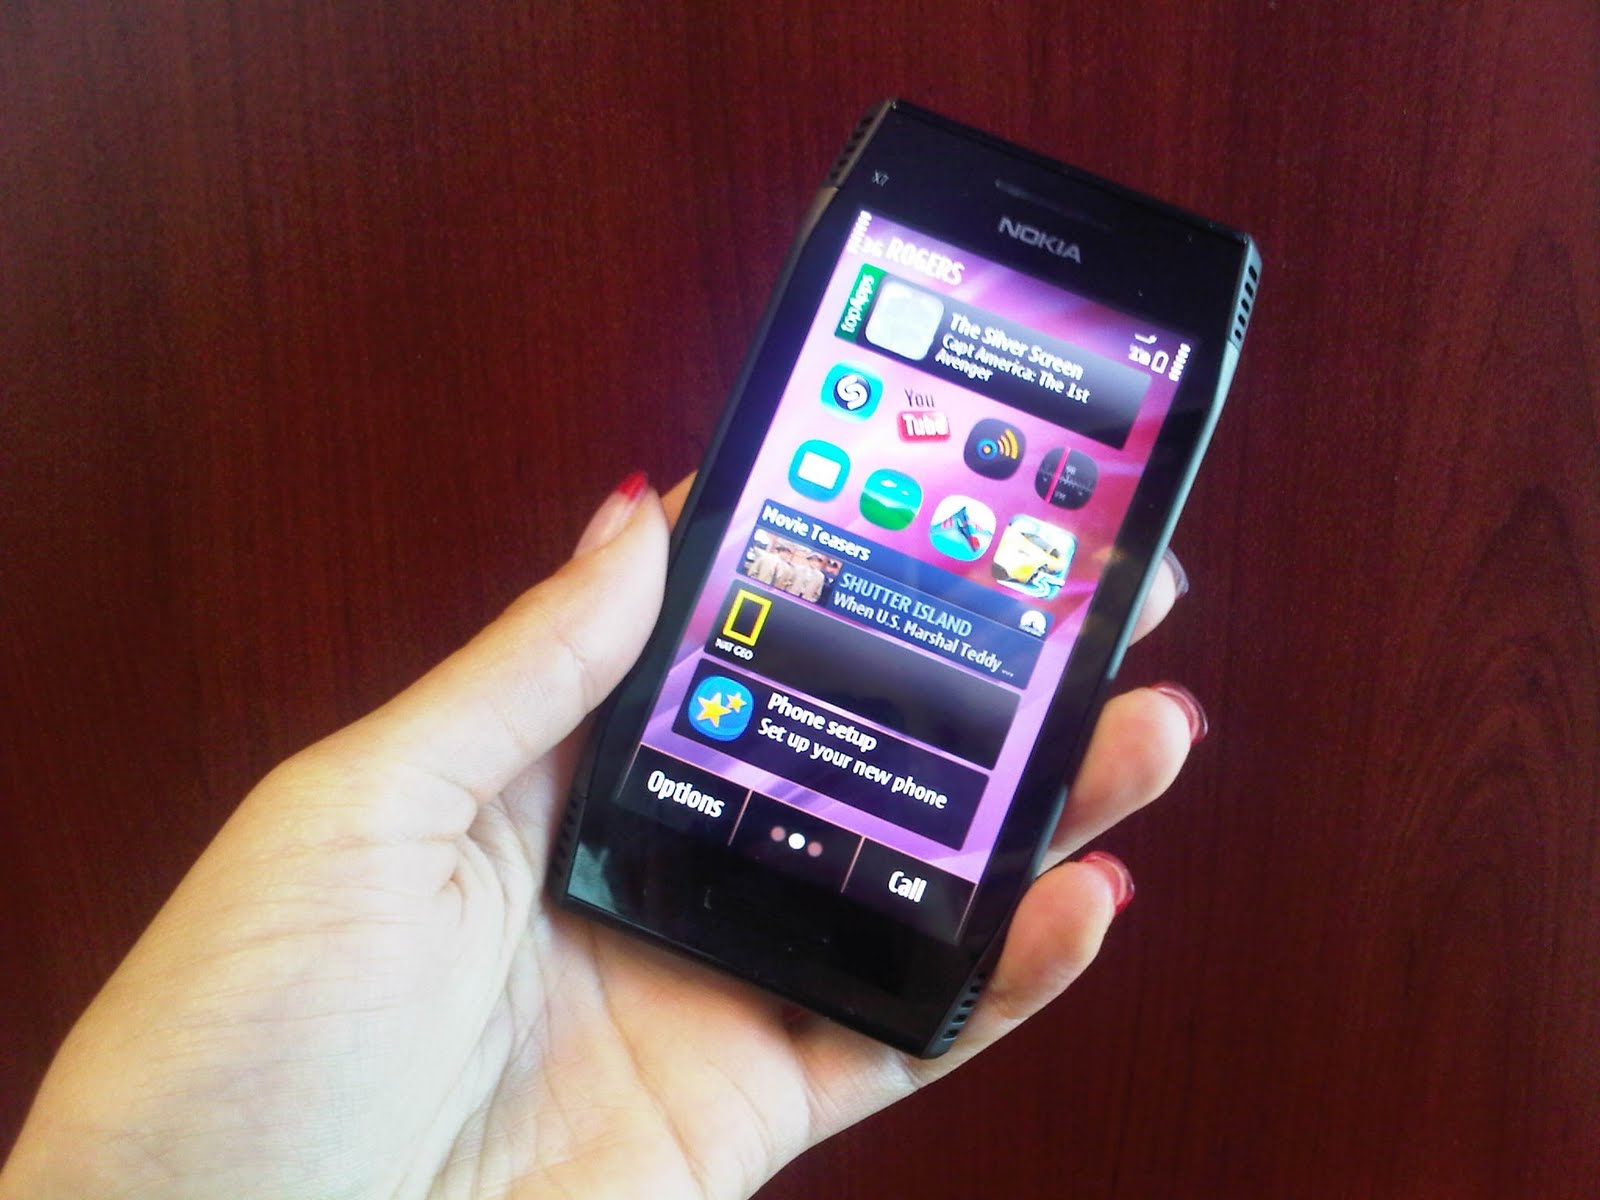 Communicating with Cellworks: Last Symbian Standing - The Nokia X7